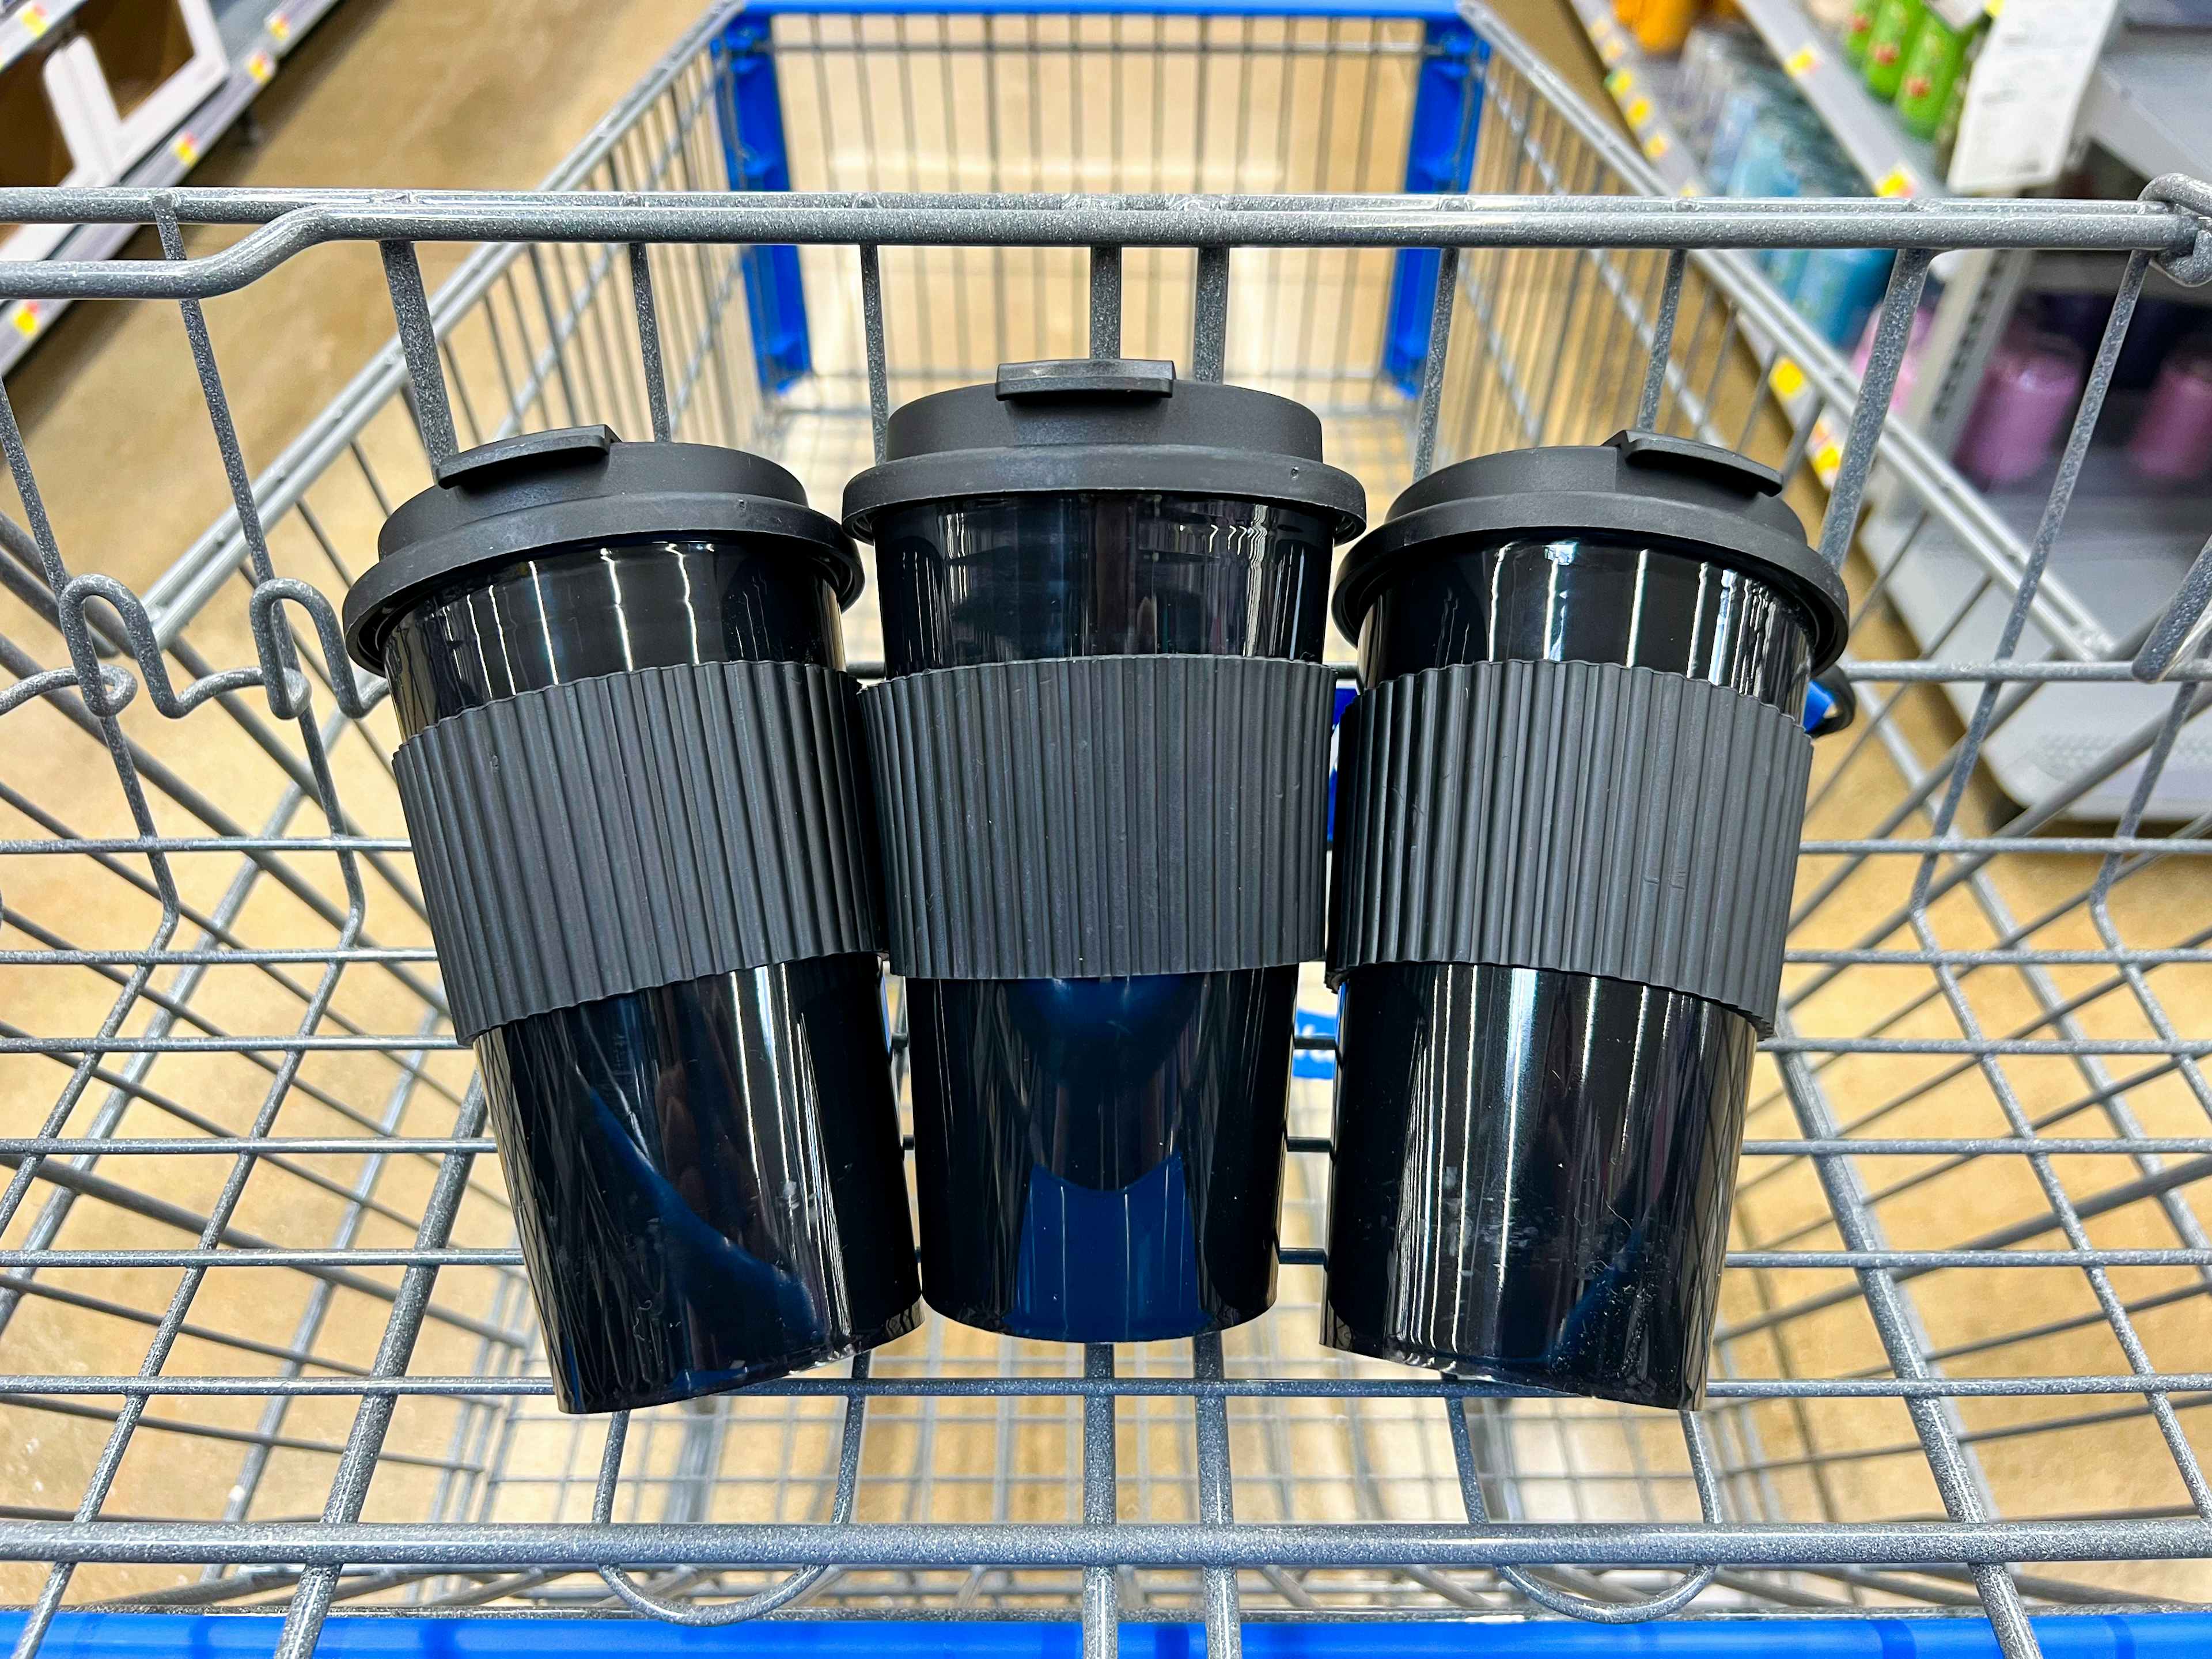 3 black reusable coffee tumblers in a cart